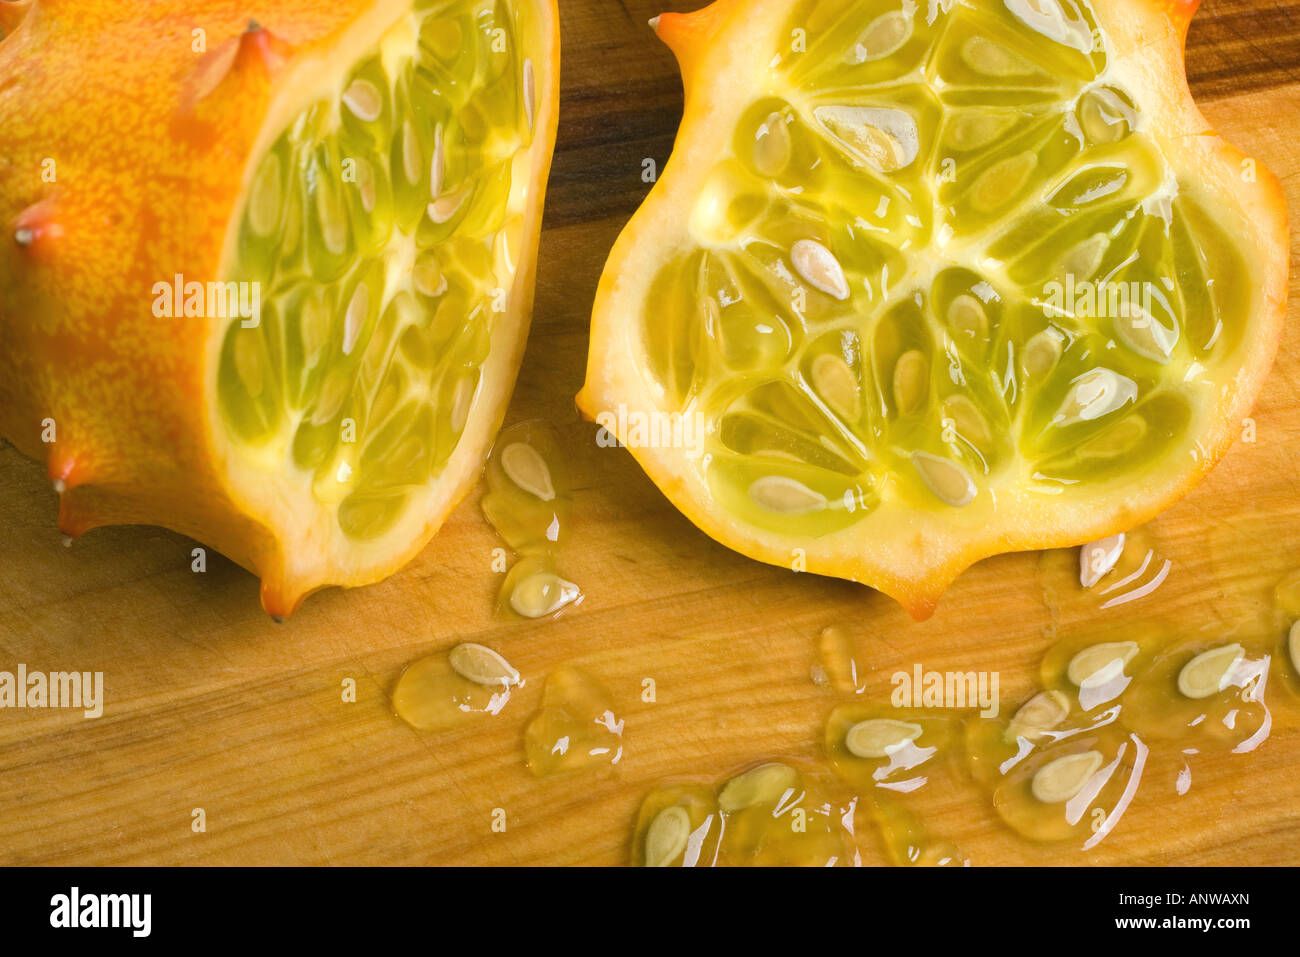 A juicy sliced open horned or Kiwano melon showing the seeds and yellow green flesh on cutting board Stock Photo